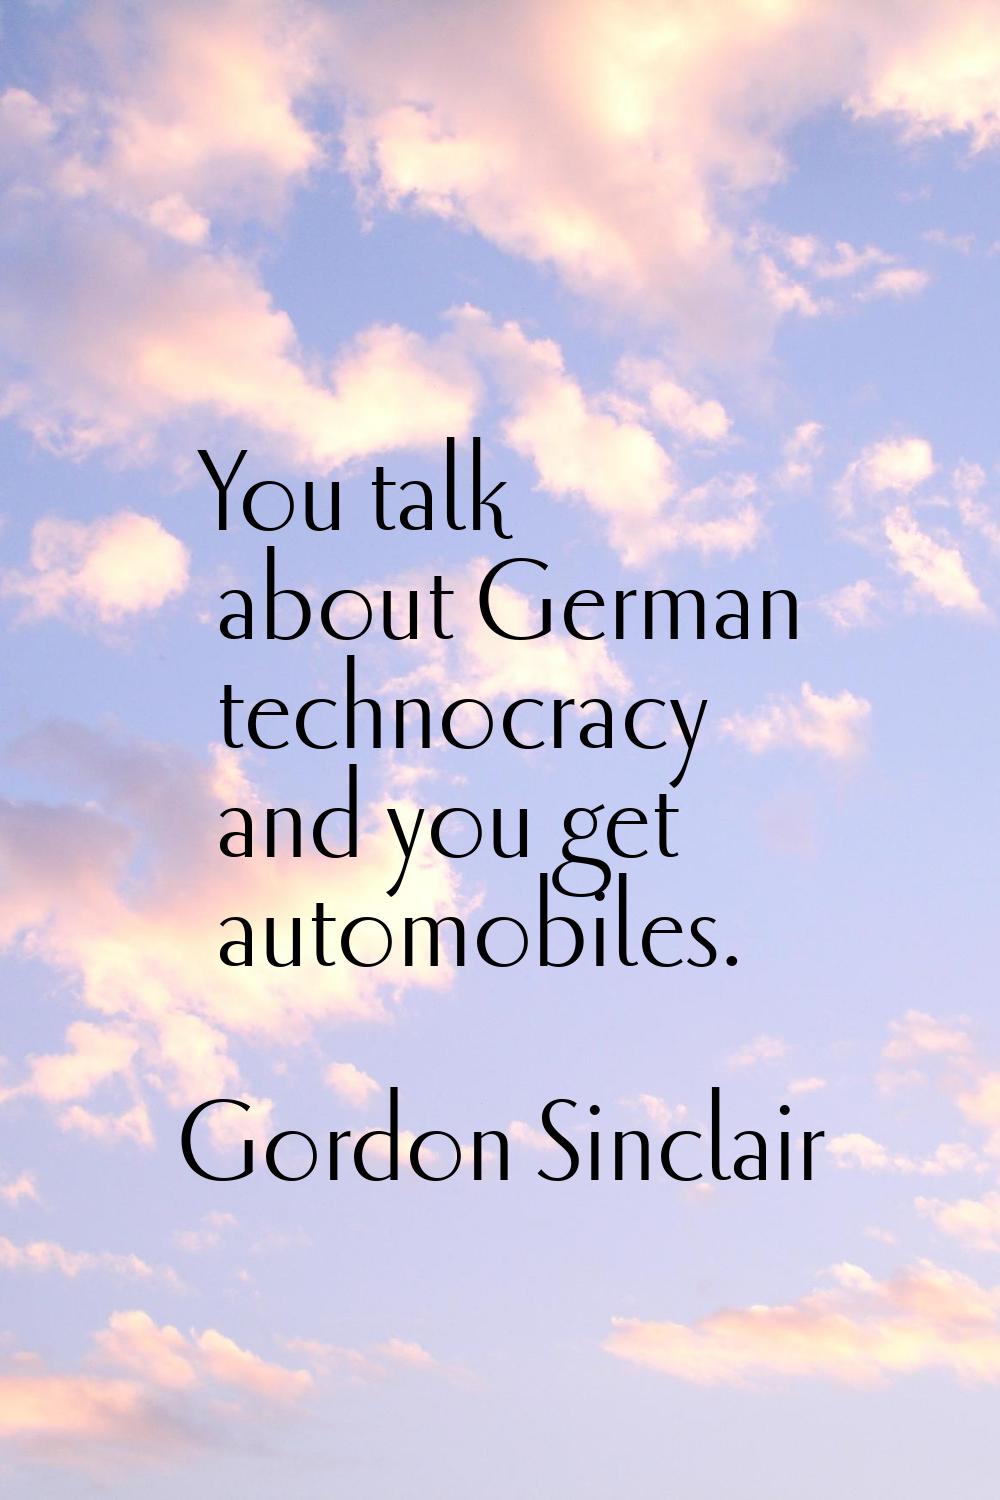 You talk about German technocracy and you get automobiles.